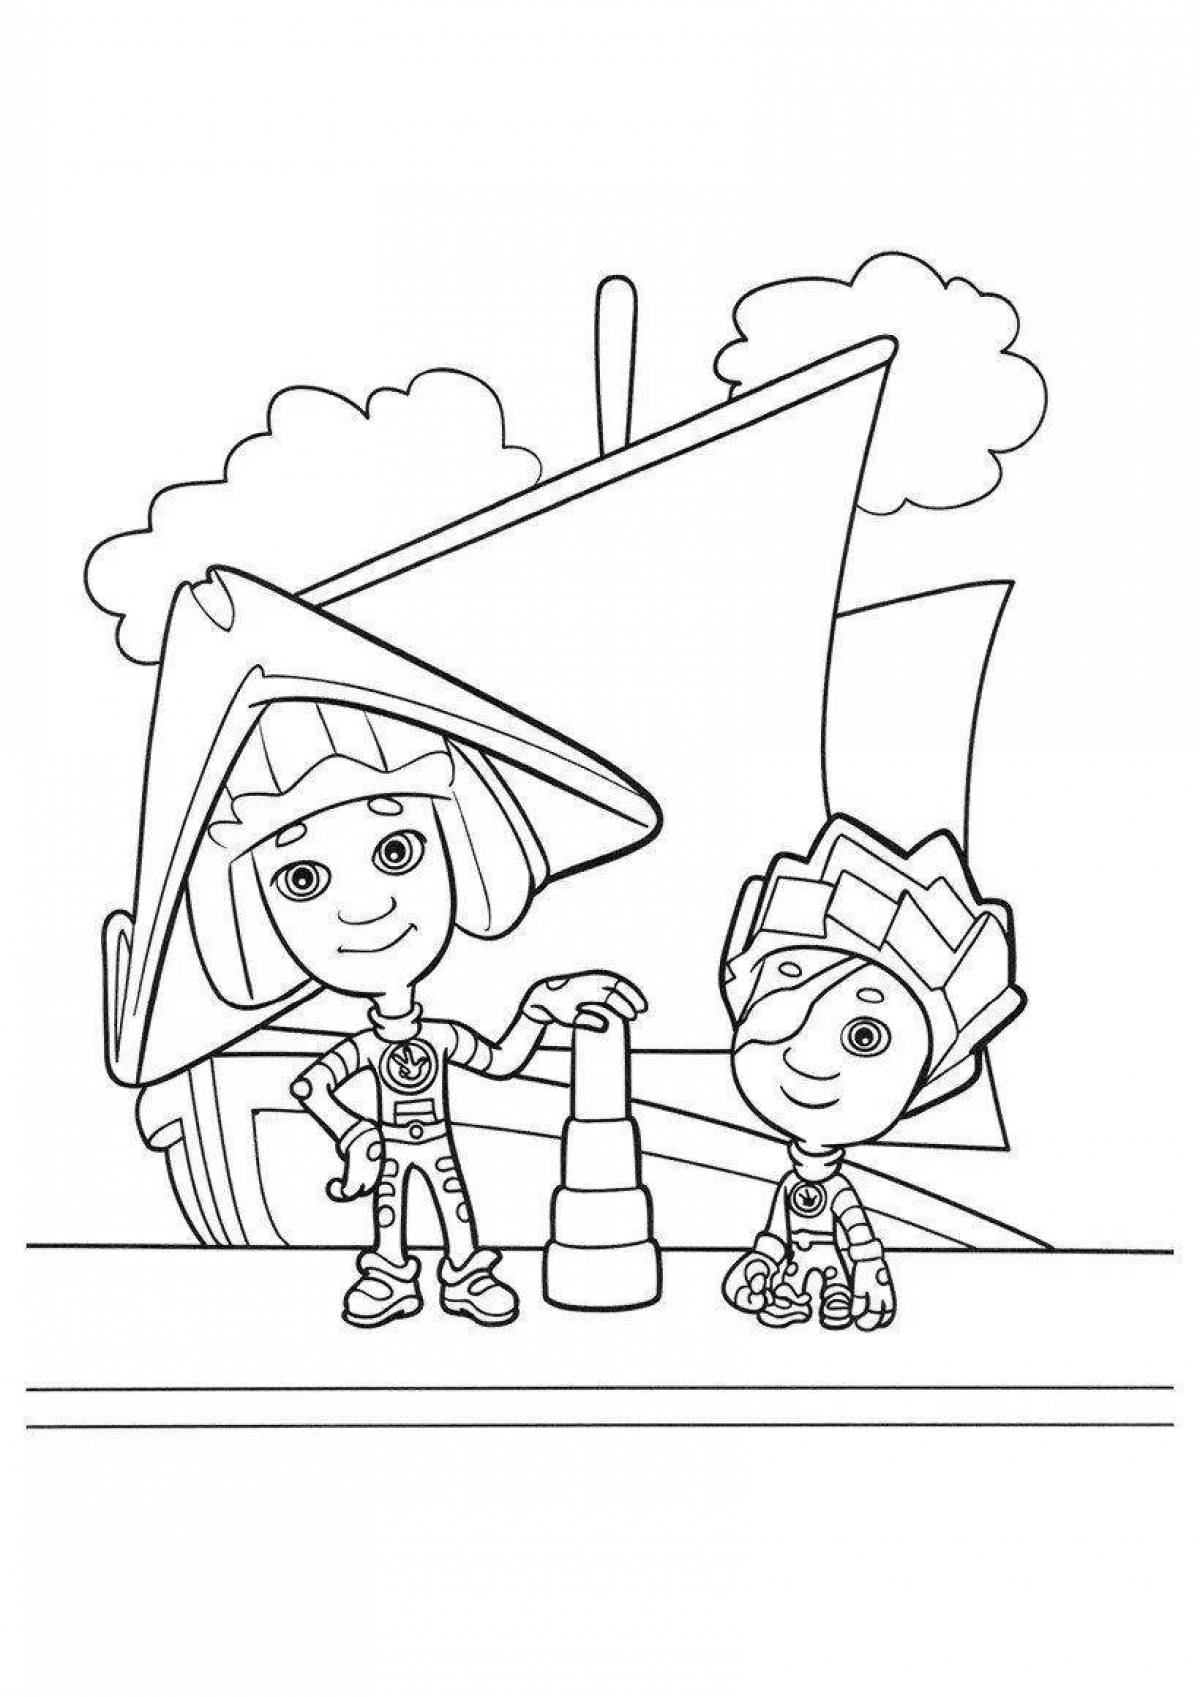 Joyous coloring page game fixes